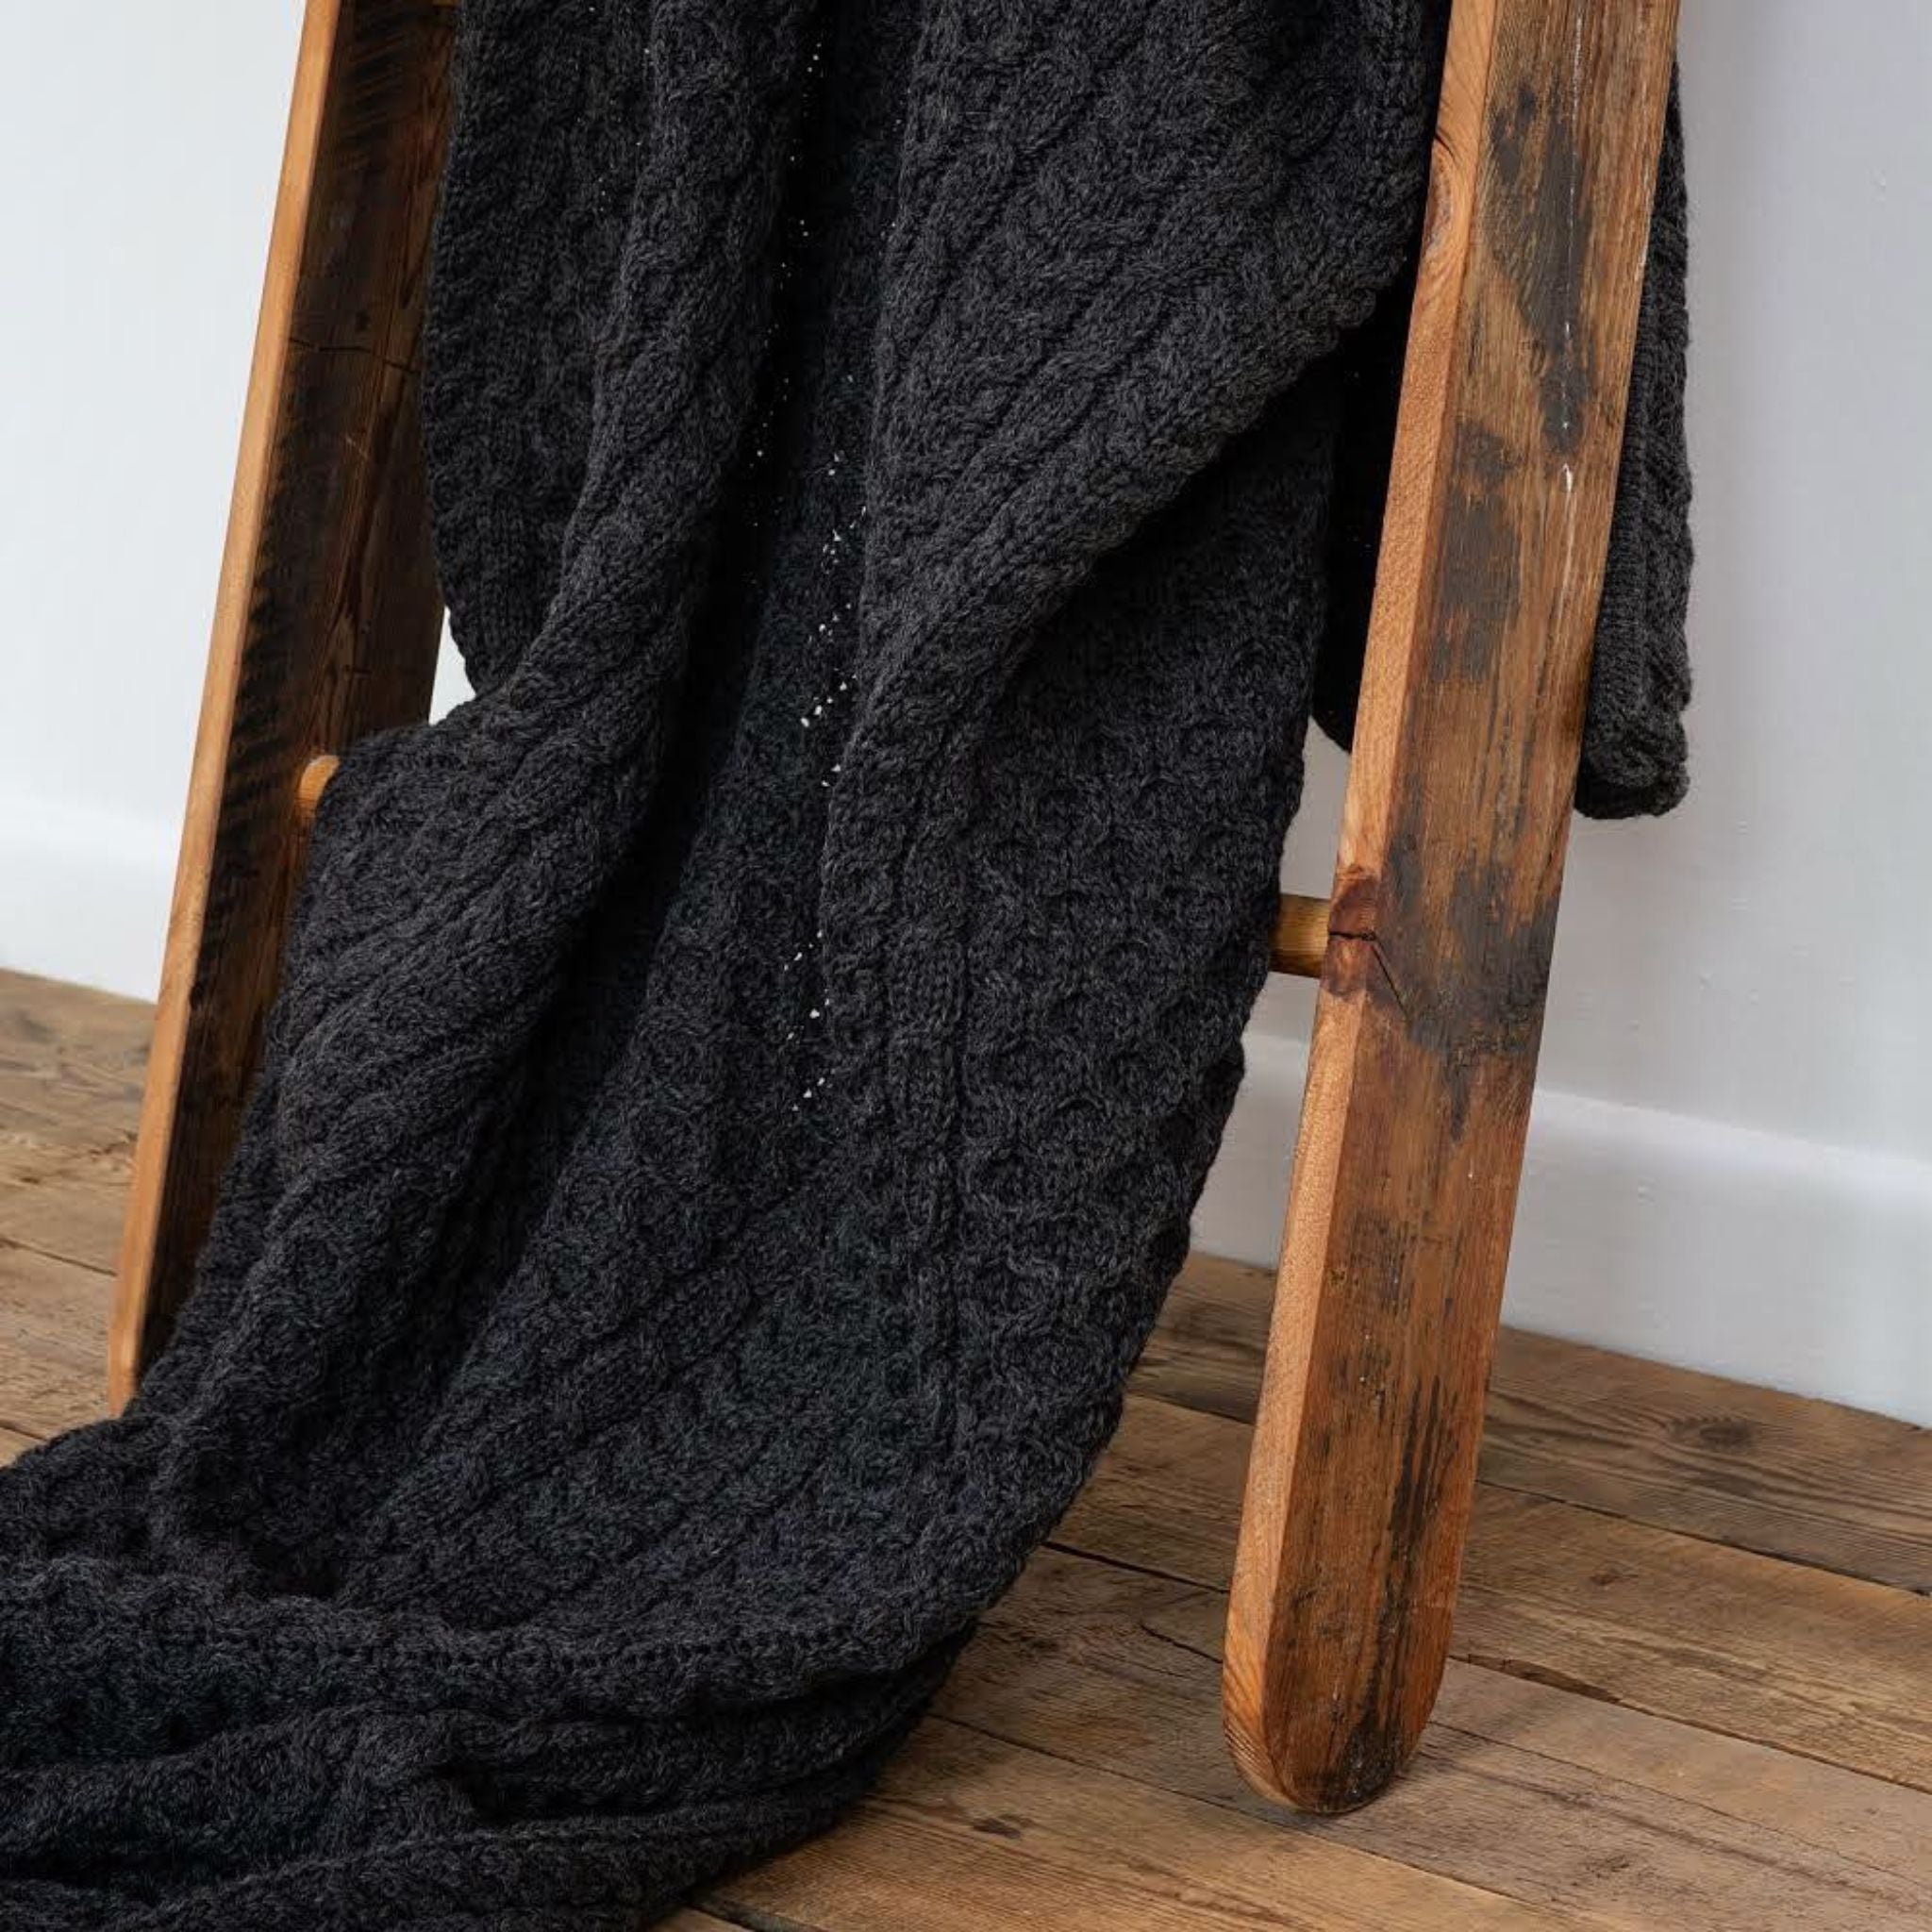 Charcoal Grey 100% Merino Wool Maria Knitted Throw on Step